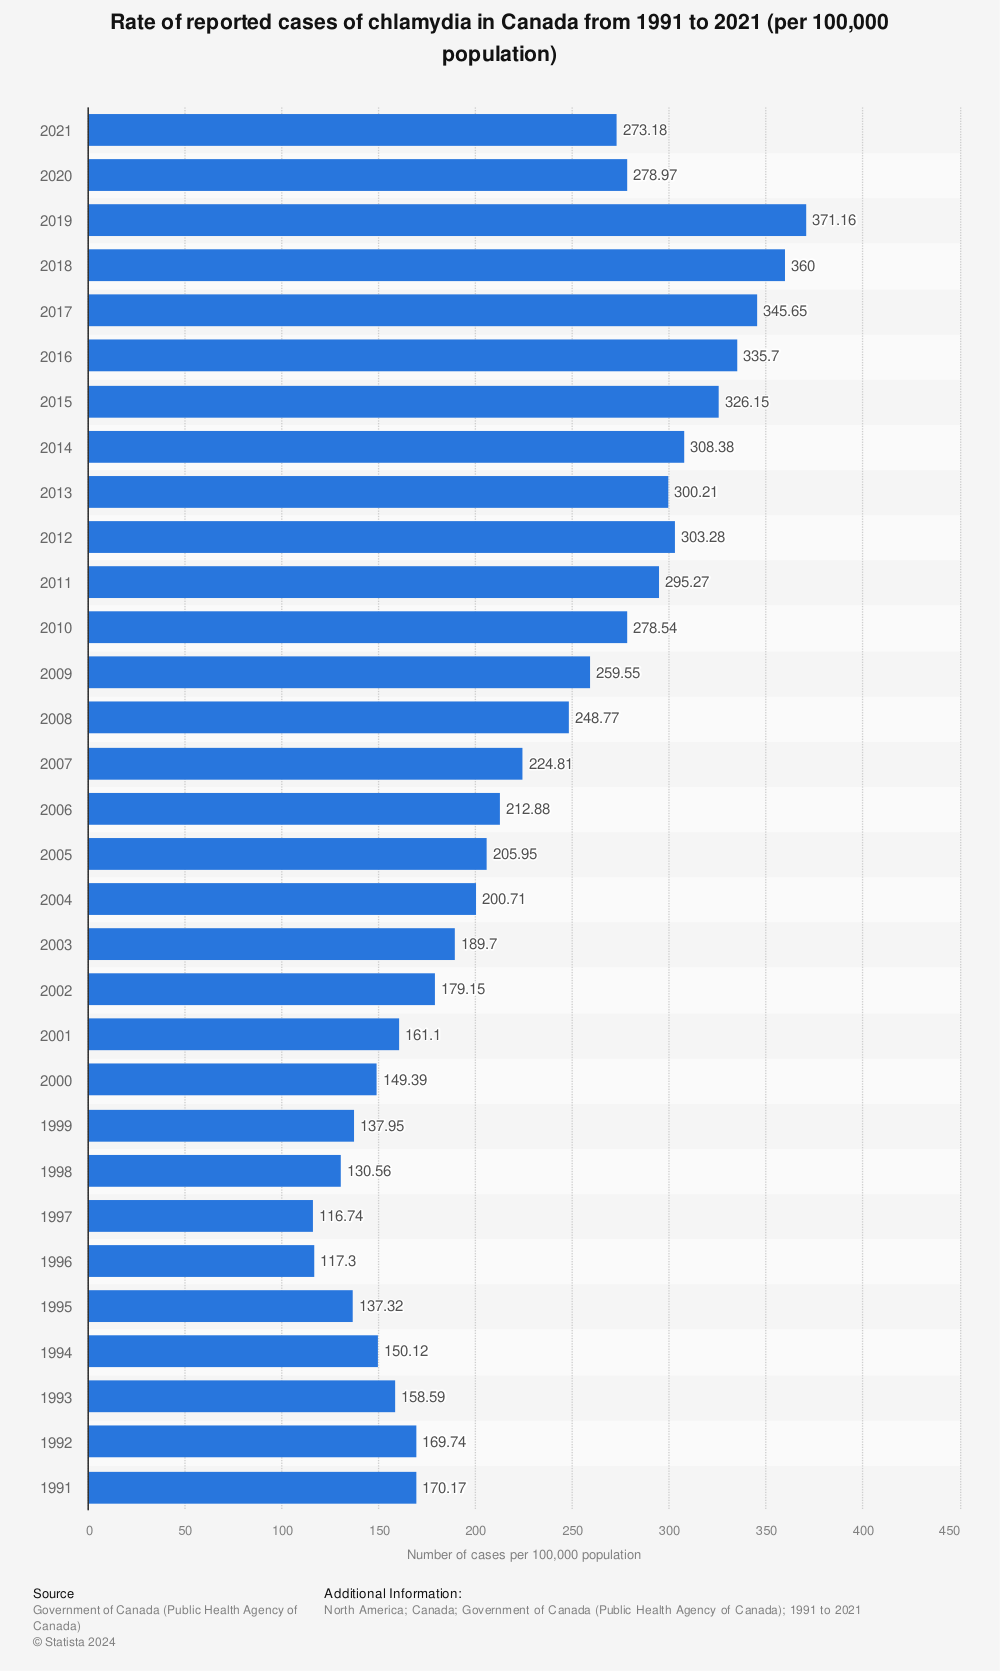 Statistic: Rate of reported cases of chlamydia in Canada from 1991 to 2020 (per 100,000 population) | Statista